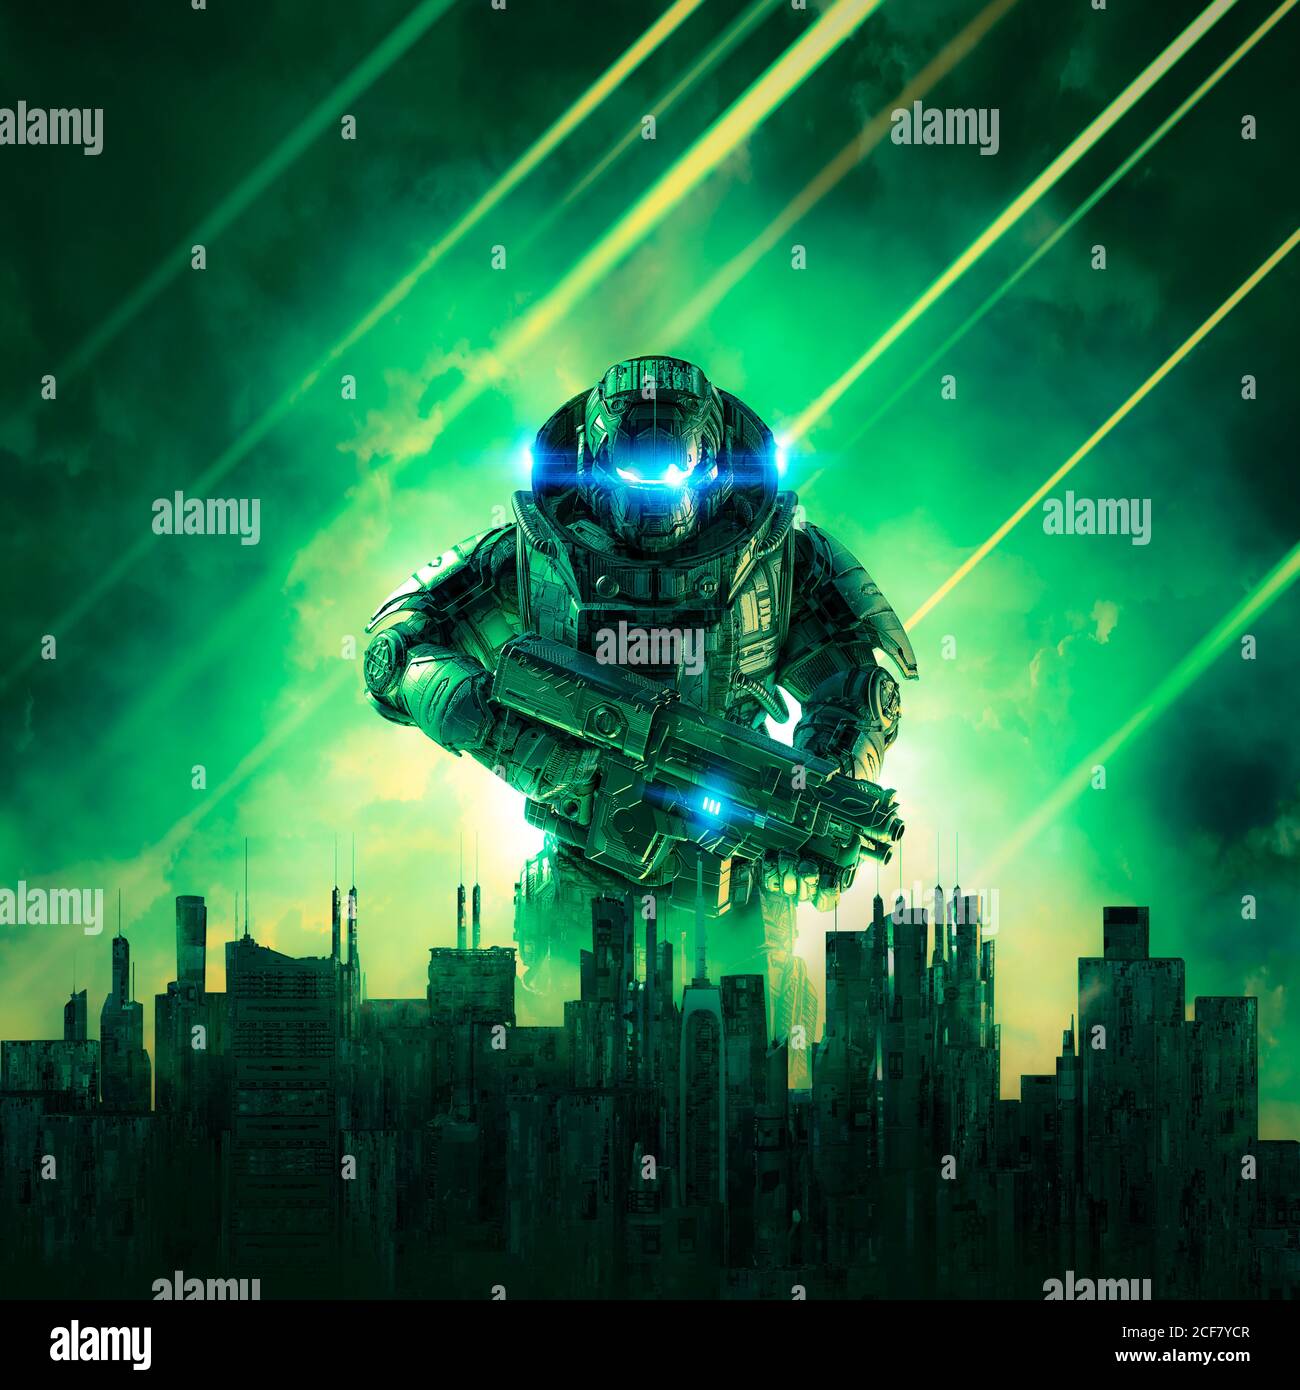 Cyberpunk soldier city under siege / 3D illustration of science fiction military robot warrior rising above futuristic dystopian skyline Stock Photo